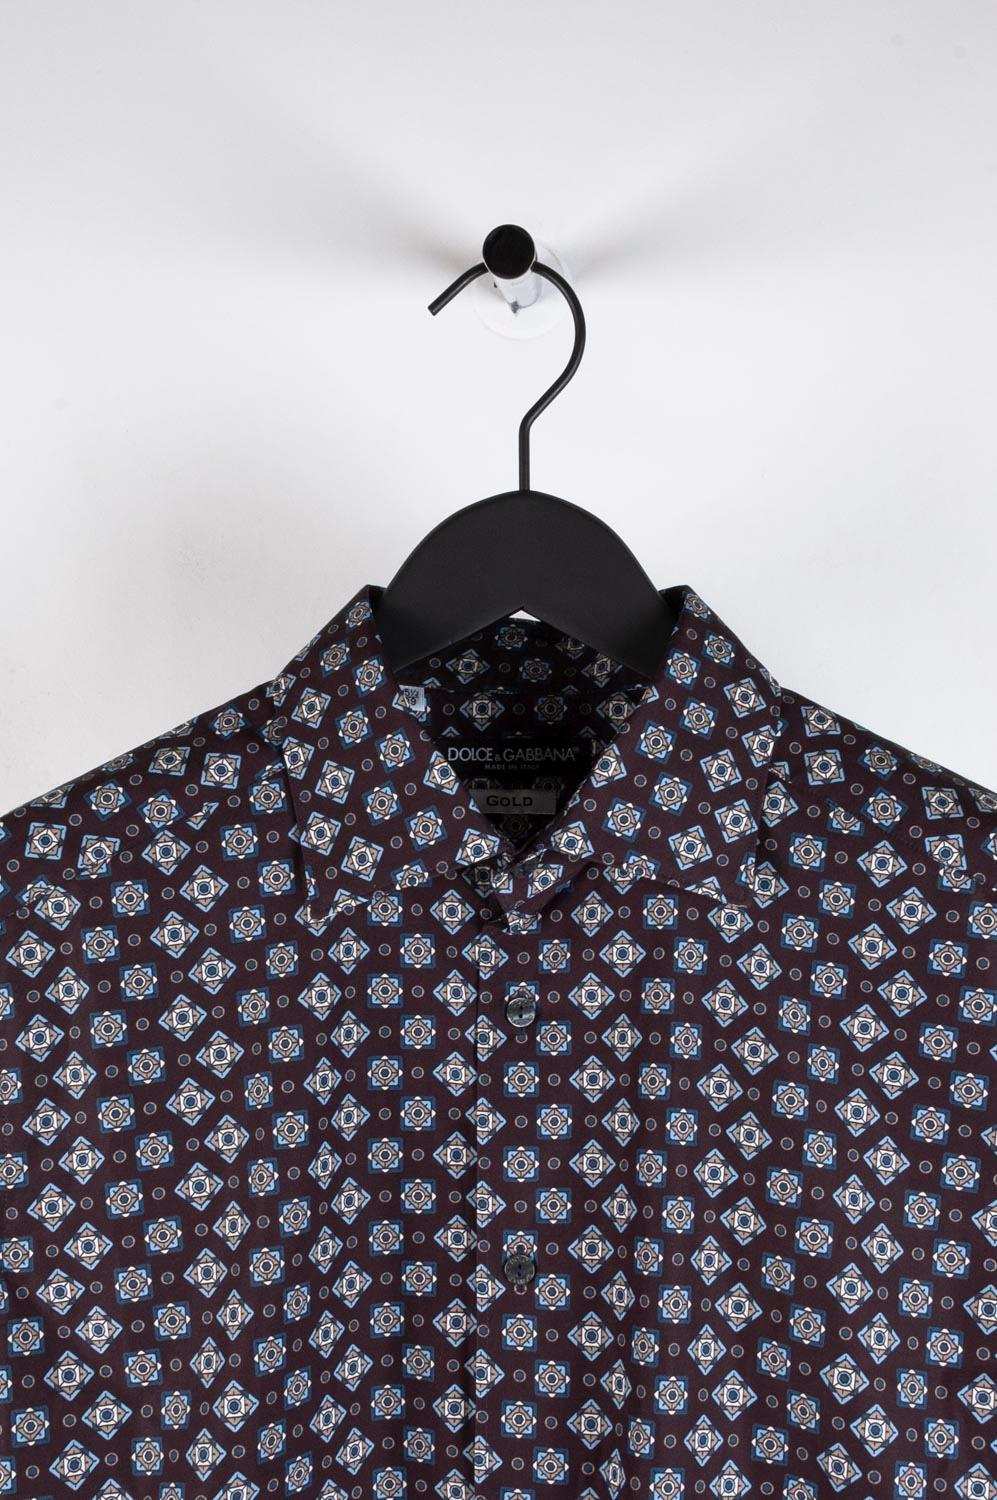 Item for sale is 100% genuine Dolce&Gabbana Mainline Shirt, S439
Color: Multicolor
(An actual color may a bit vary due to individual computer screen interpretation)
Material: Care tag cut, it is cotton
Tag size: 15.5/39 runs Medium
This shirt is